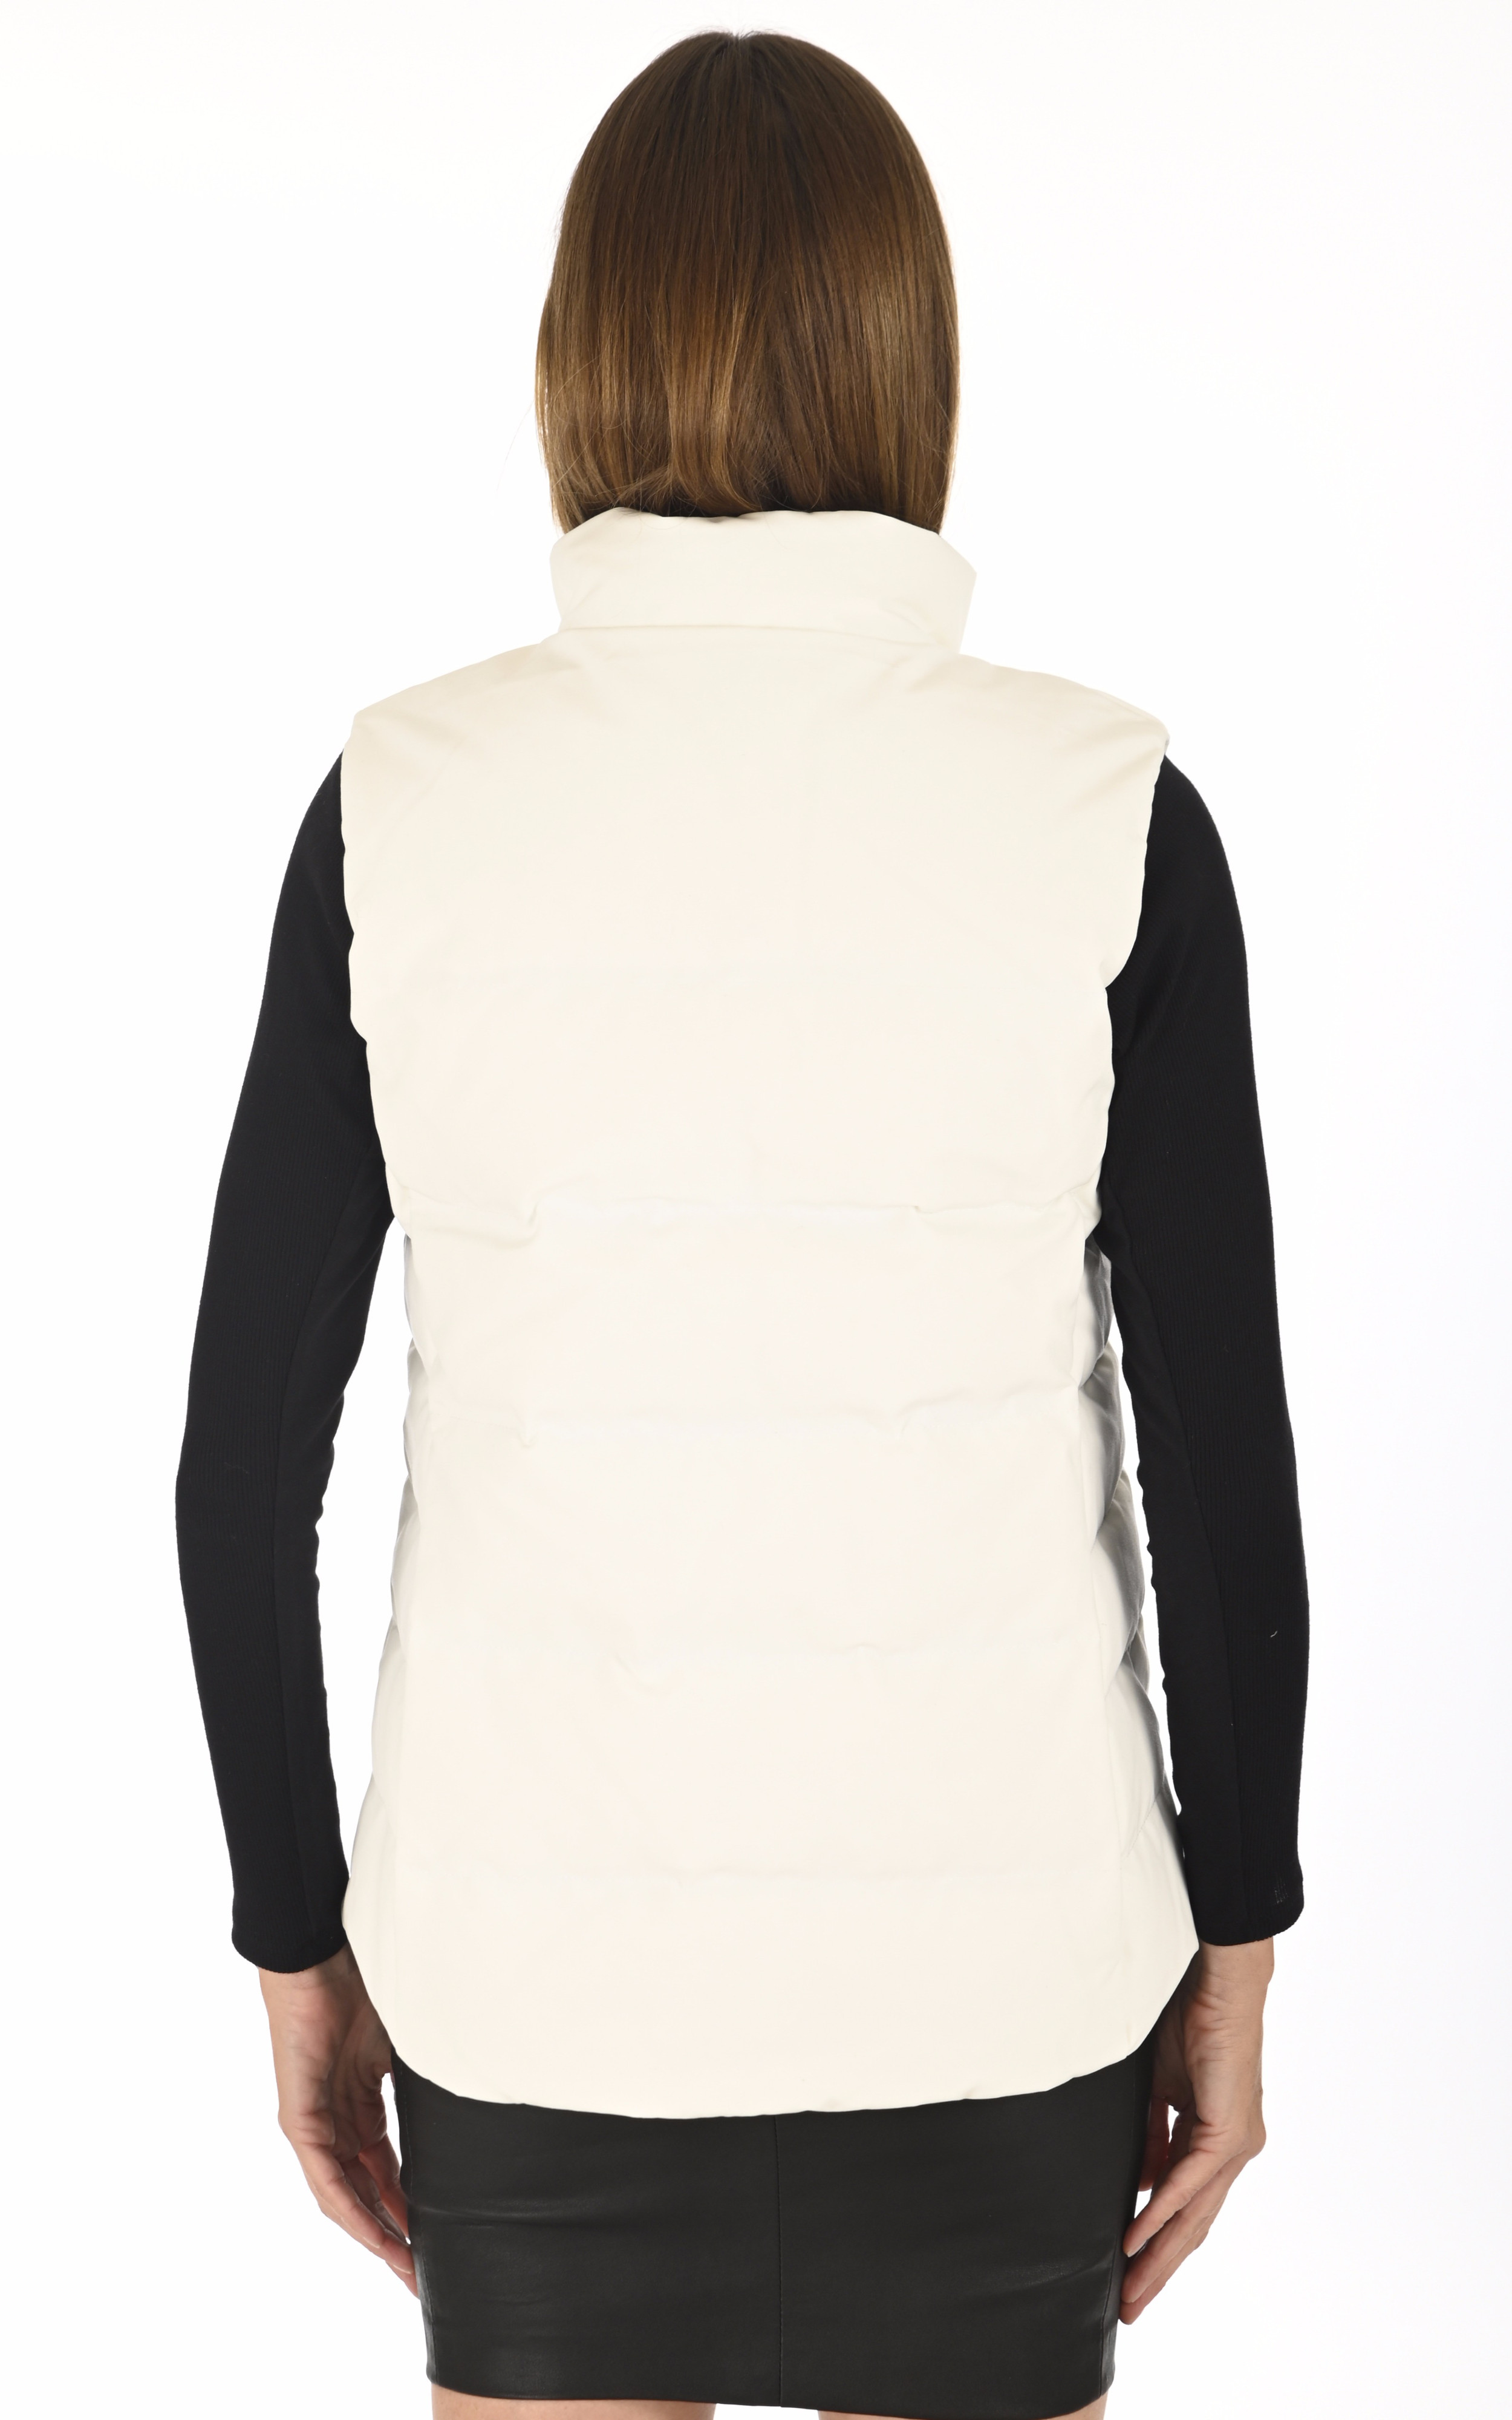 Gilet Freestyle north star white Canada Goose